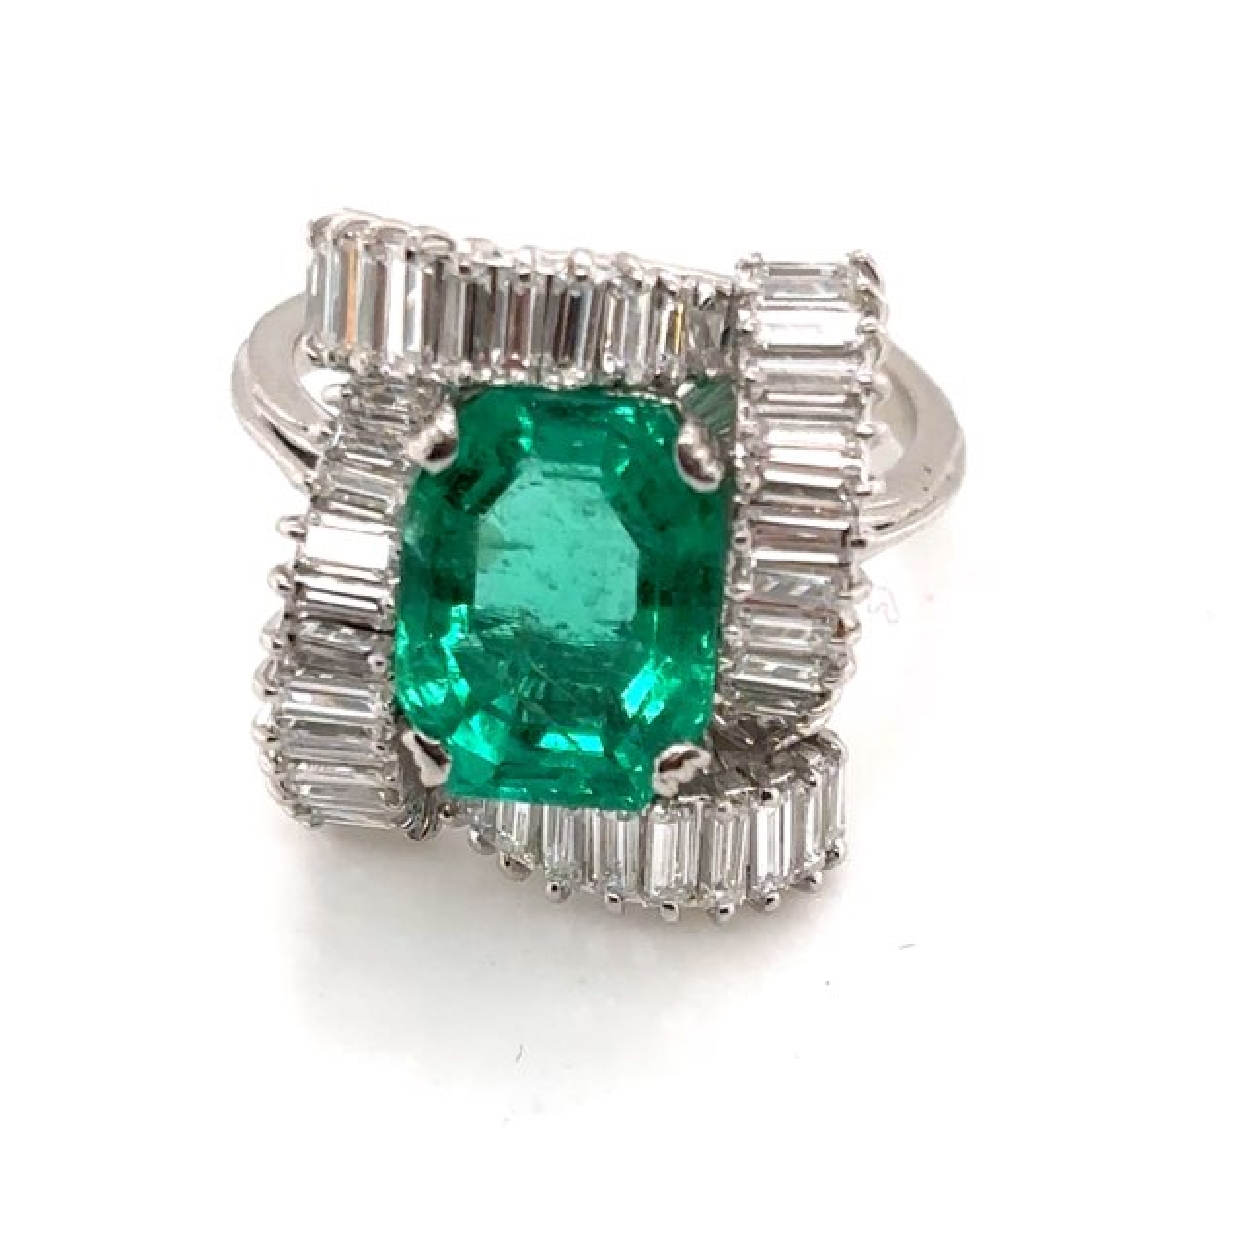 18K White Gold Columbian Octagon Emerald 3.85CT with Baggett Diamond Halo 

Size 6.75

GIA Report on Emerald